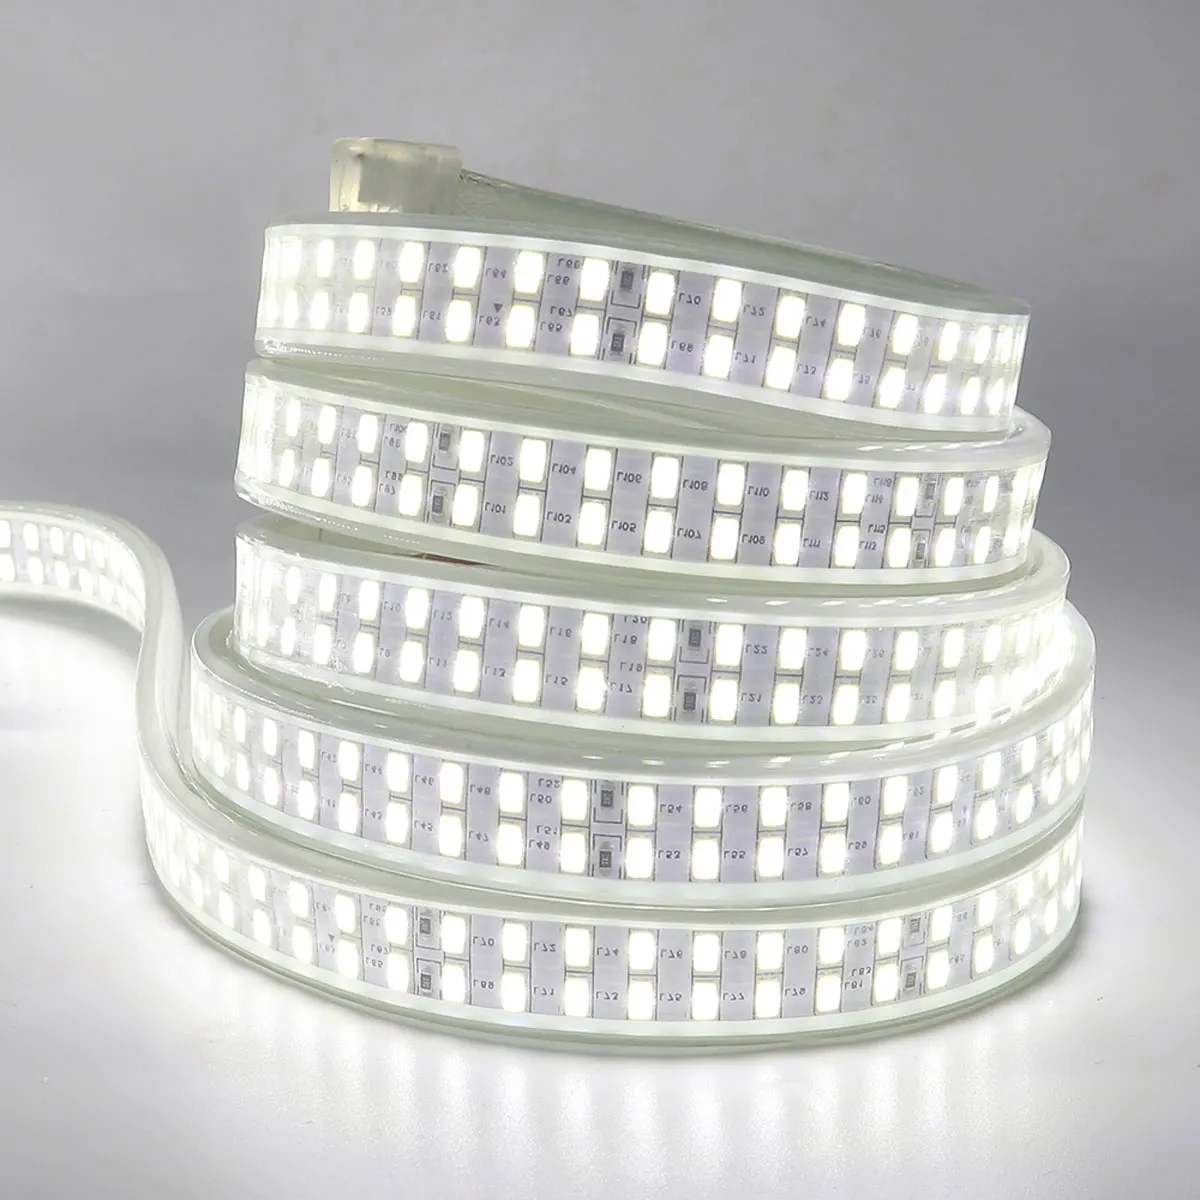 Flexible Commercial AC110V-230V High Voltage Waterpoof IP68 Super Bright 5730 240 LEDs/m Strip Lights for Home Outdoor Indoor